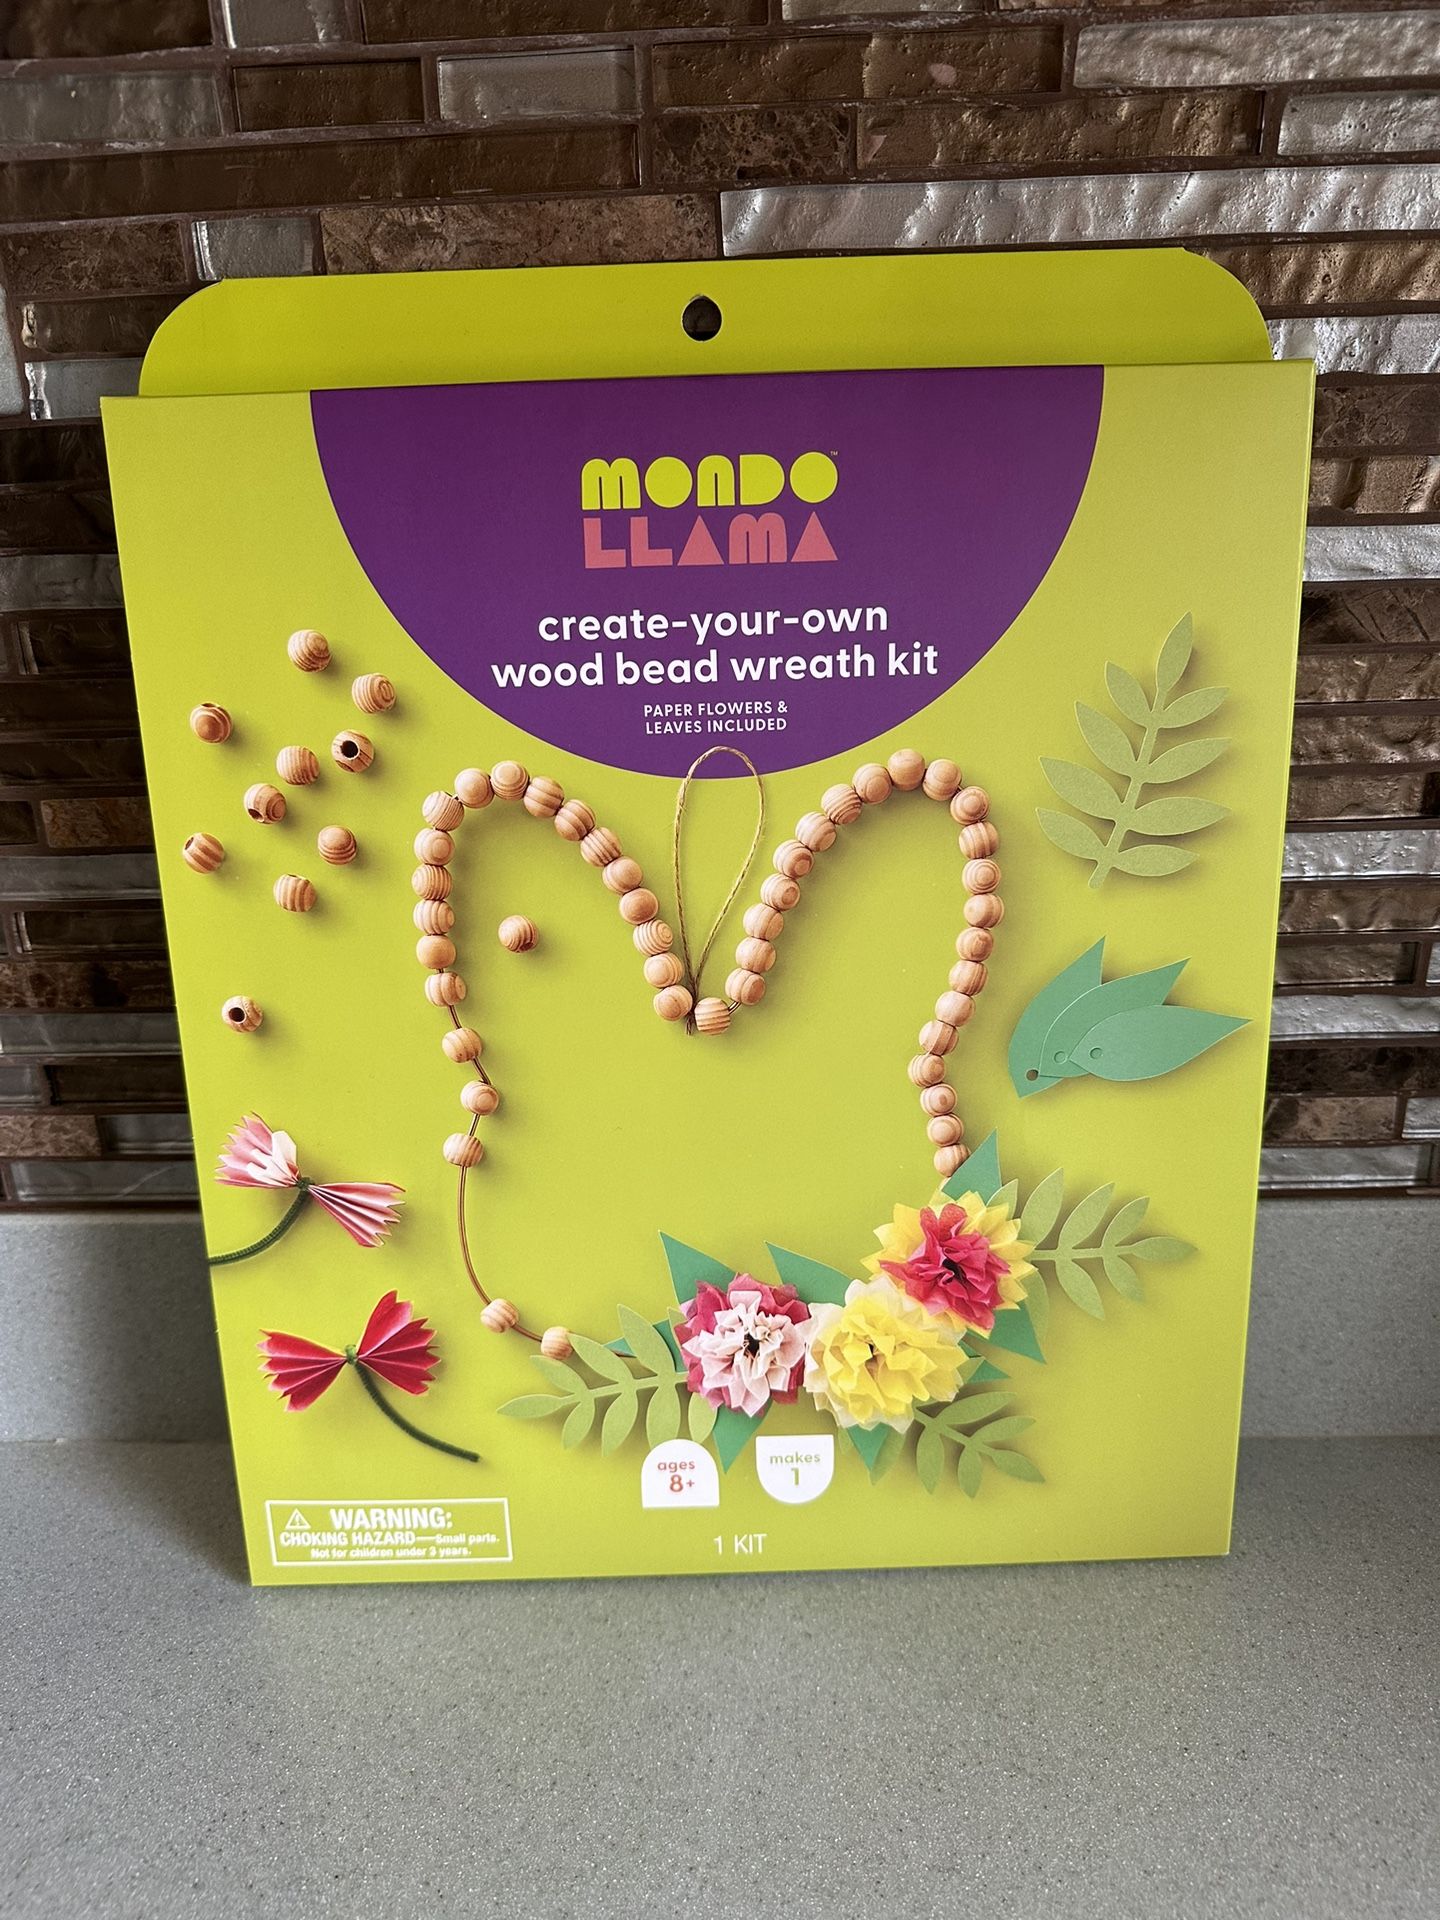 BRAND NEW CREATE YOUR OWN WOOD BEAD WREATH KIT PAPER FLOWERS AND LEAVES INCLUDED 